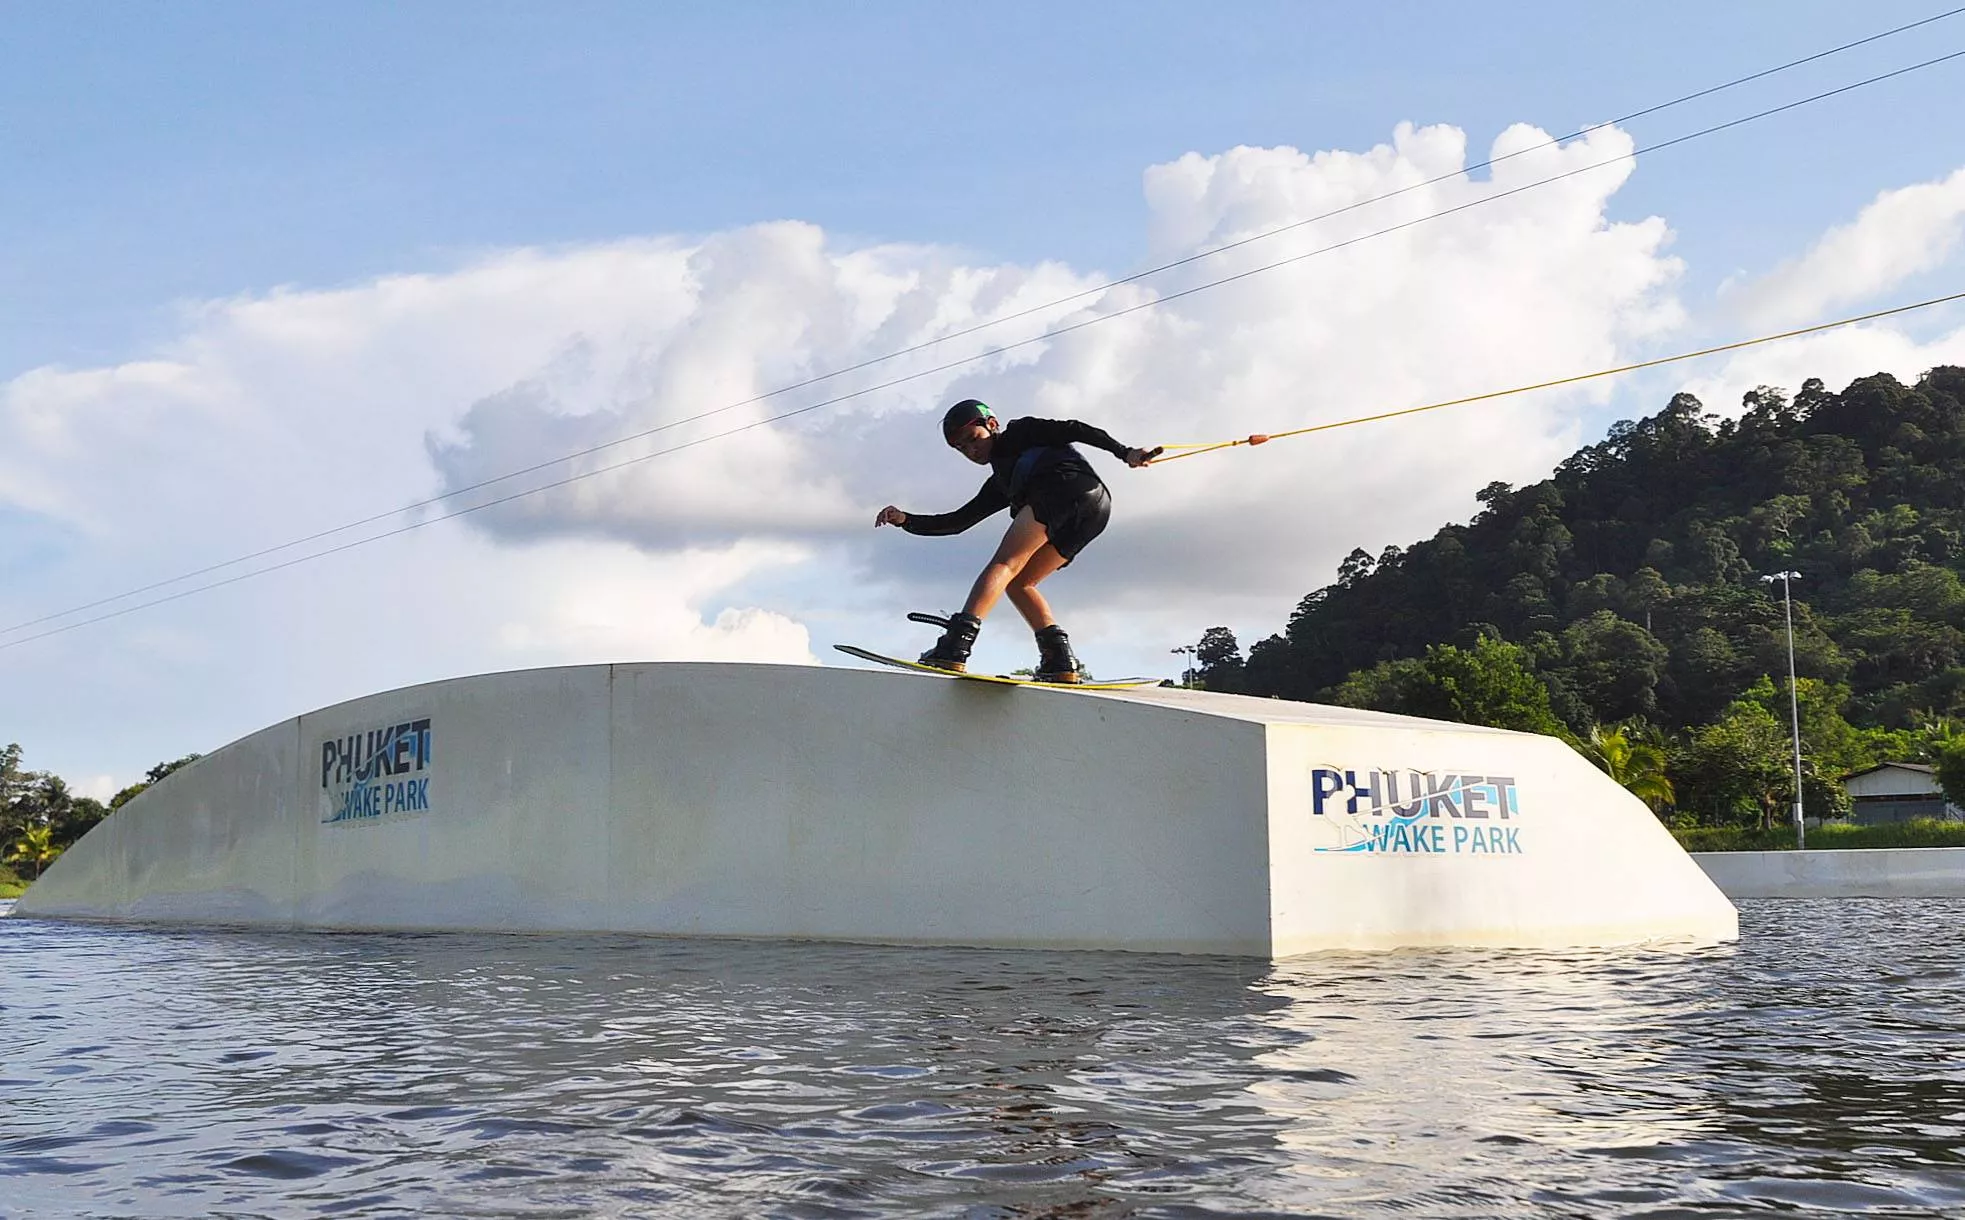 Phuket Wake Park in Thailand, Central Asia | Wakeboarding - Rated 4.4